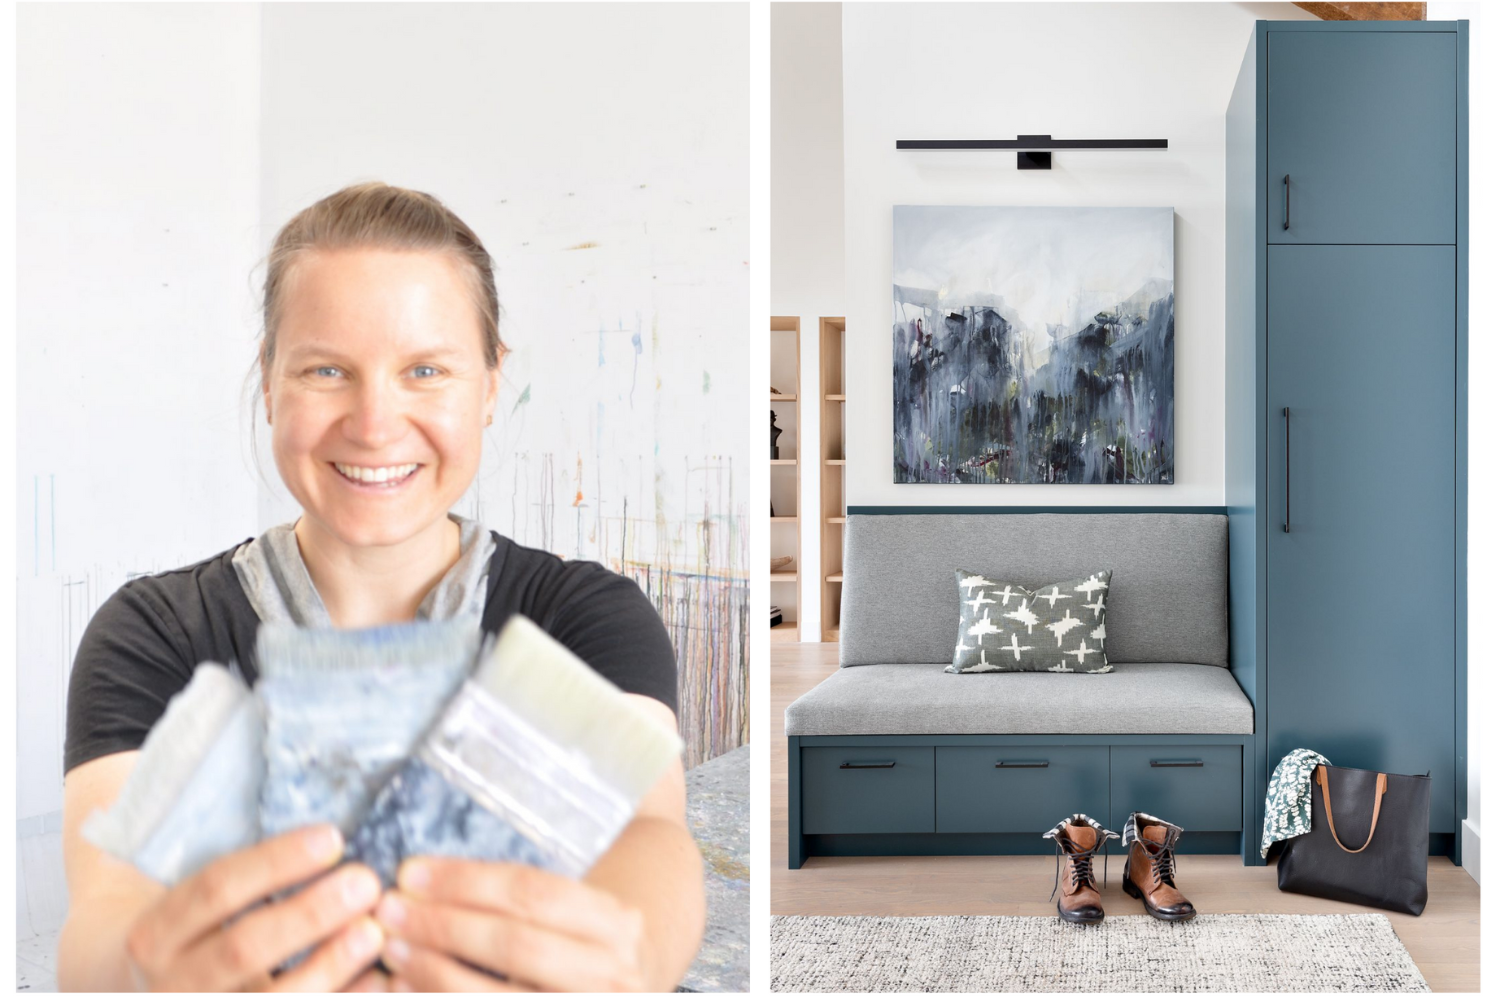 simply-home-decorating-lions-bay-north-vancouver-bc-ca-designing-a-home-with-team-of-experts-lisa-ochowycz-commissioned-art-refined